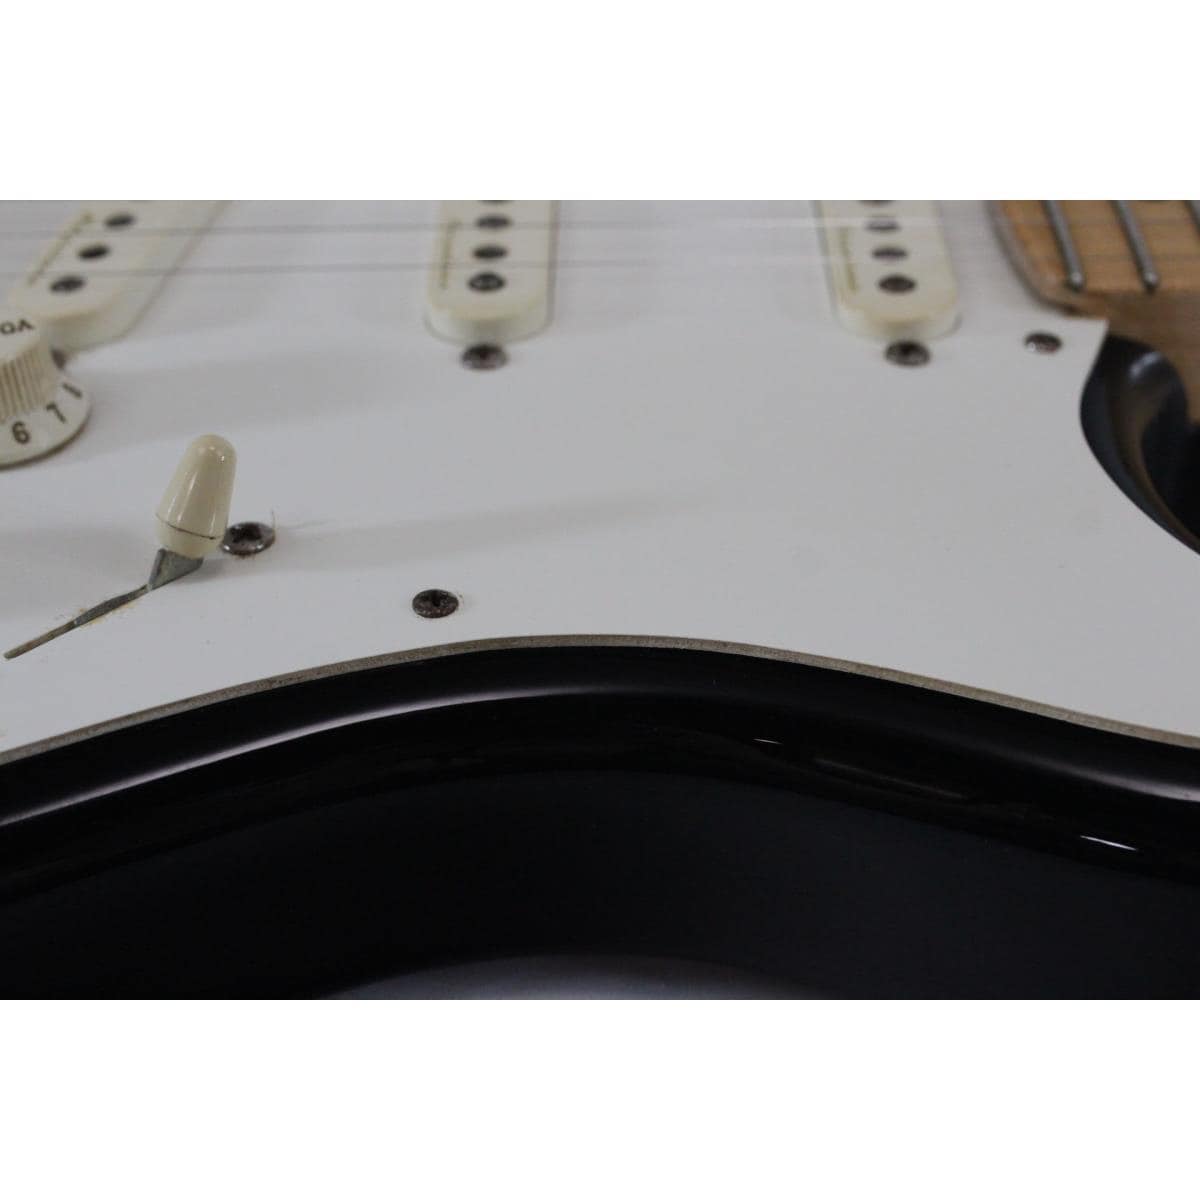 Fender Custom Shop MBS Eric Clapton Stratocaster by T. Krause